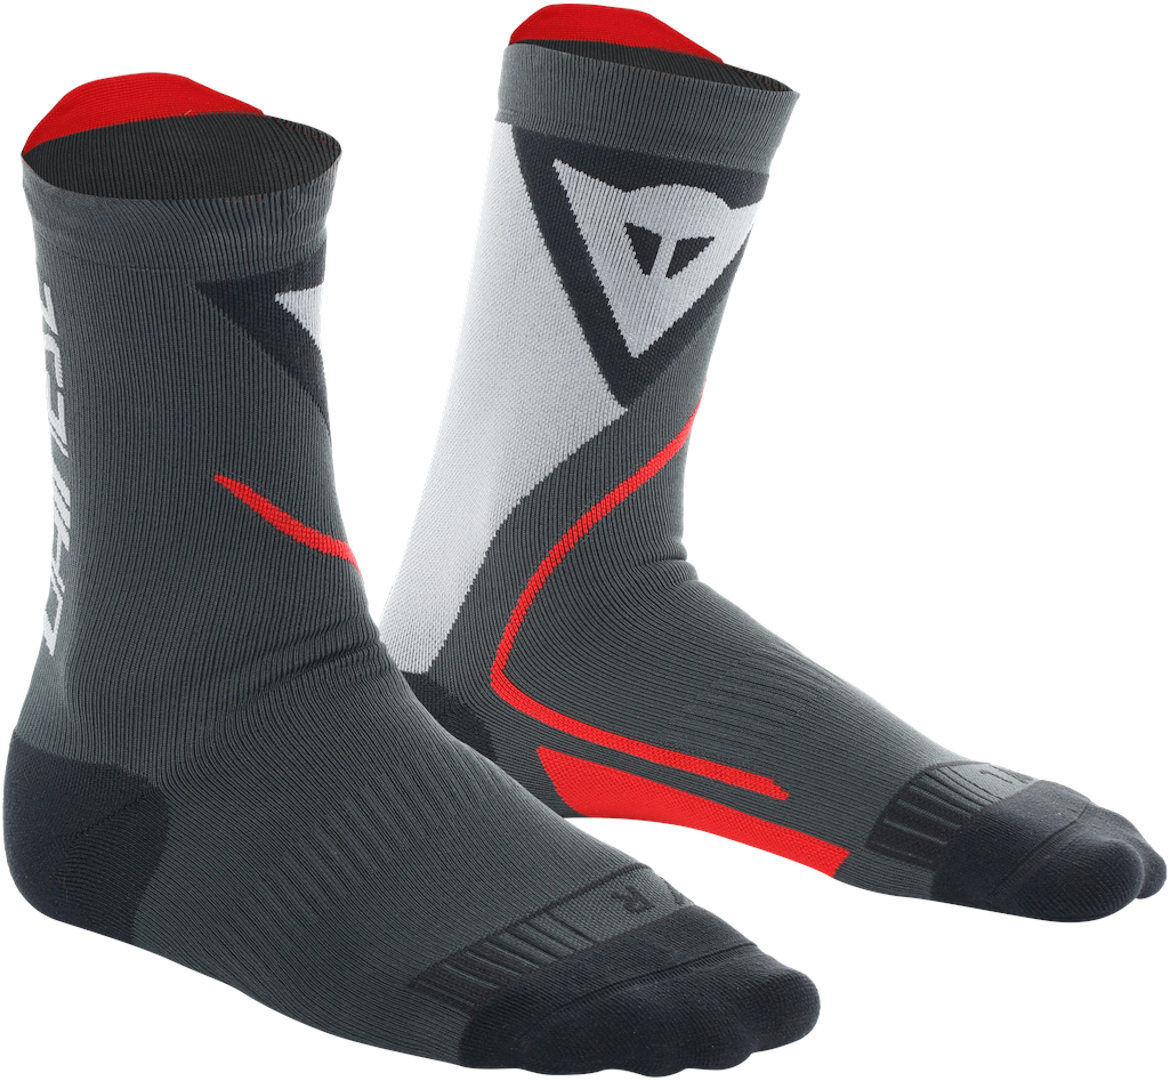 Dainese Thermo Mid Calcetines - Negro Gris Rojo (42 43 44)